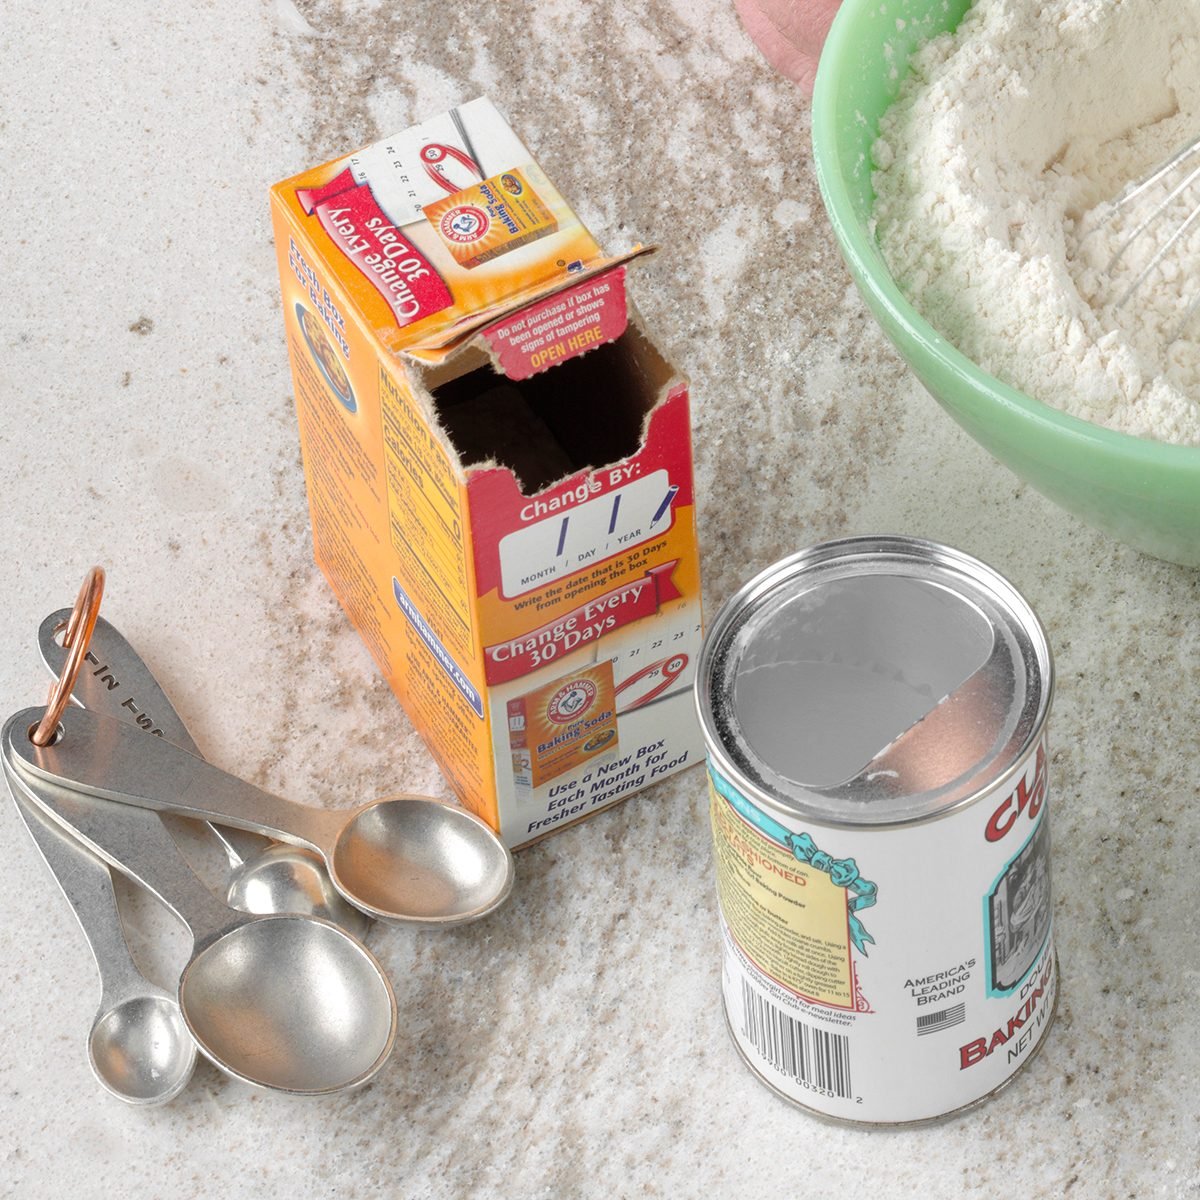 How to Test Baking Powder and Baking Soda for Freshness - Bake or